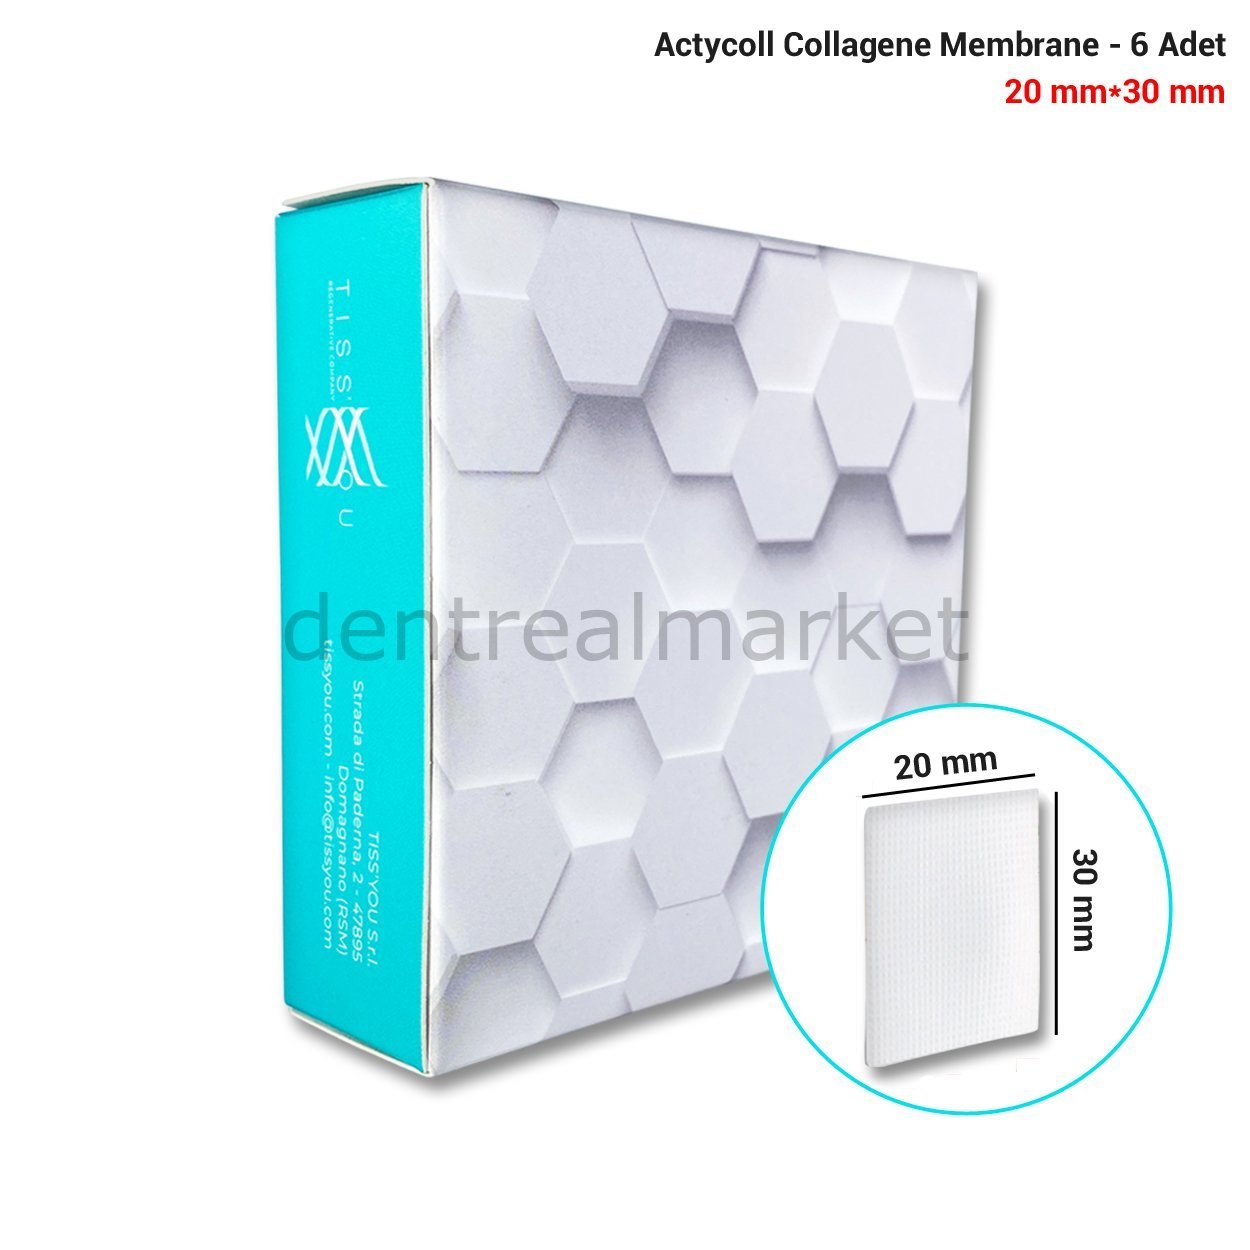 DentrealStore - Actycoll Collagene Membrane - 20*30 mm - 6 Pieces